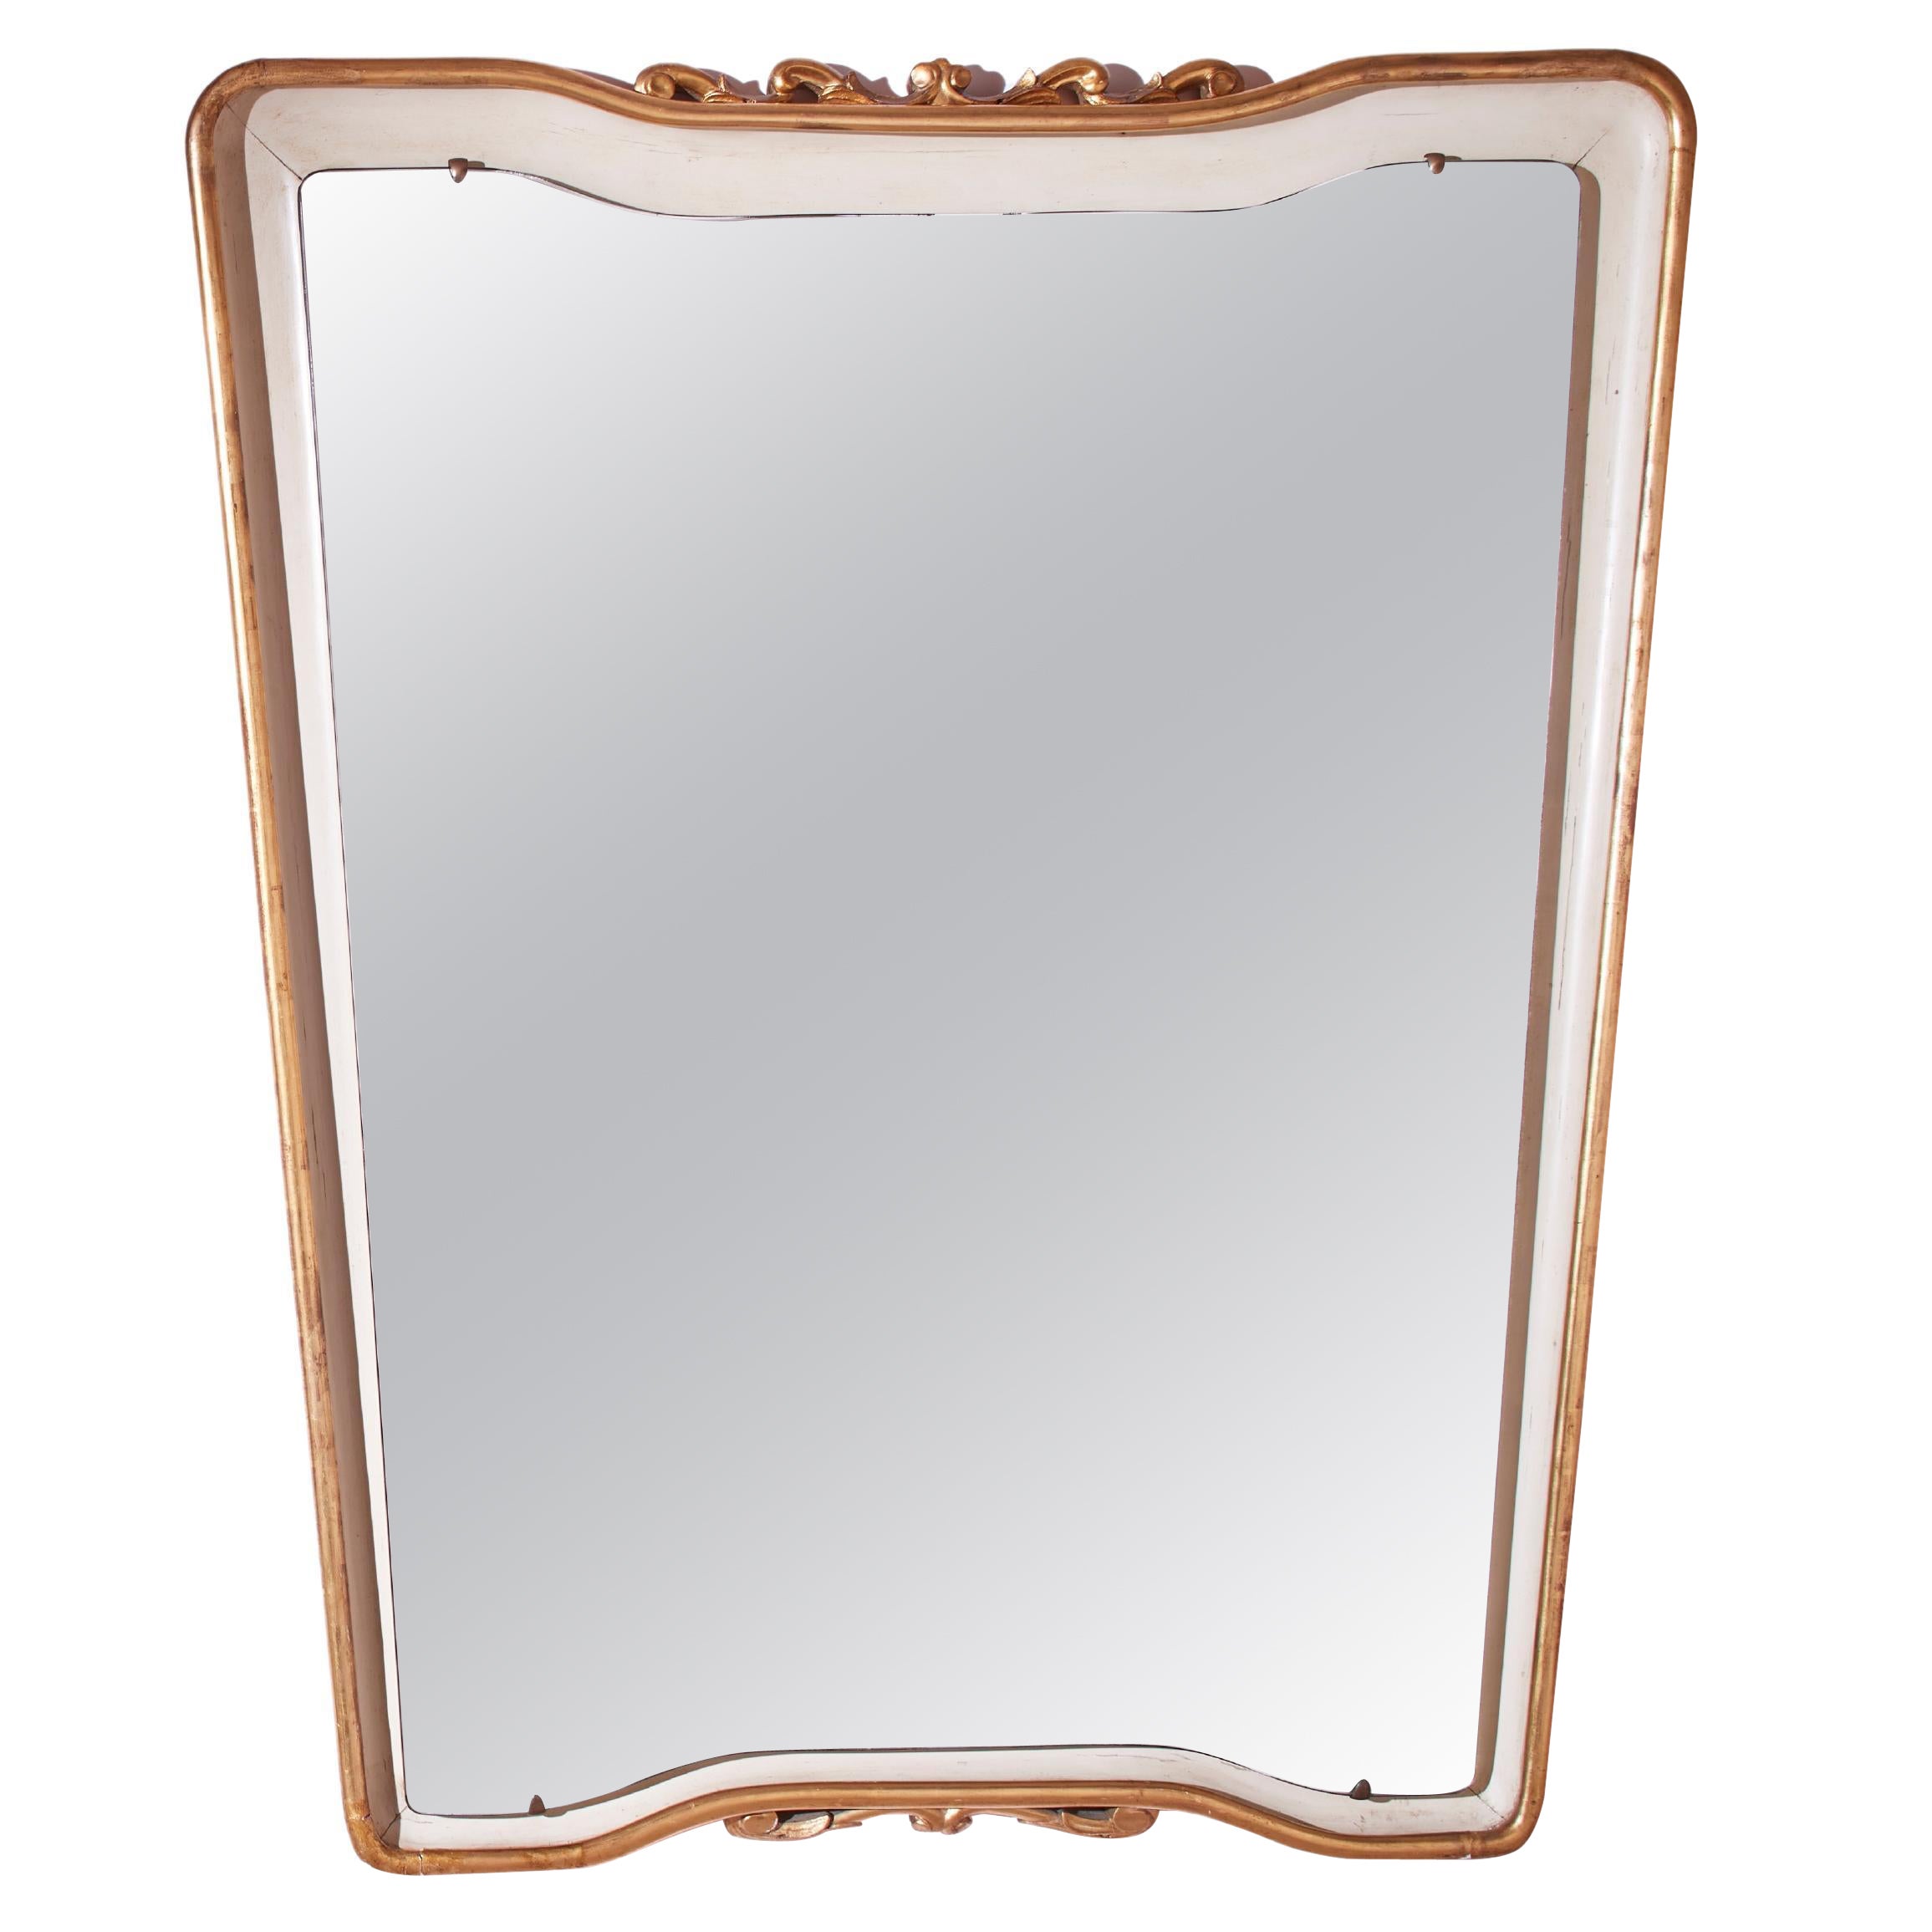 Osvaldo Borsani lacquered and gilded frame mirror, Italy, 1950s For Sale